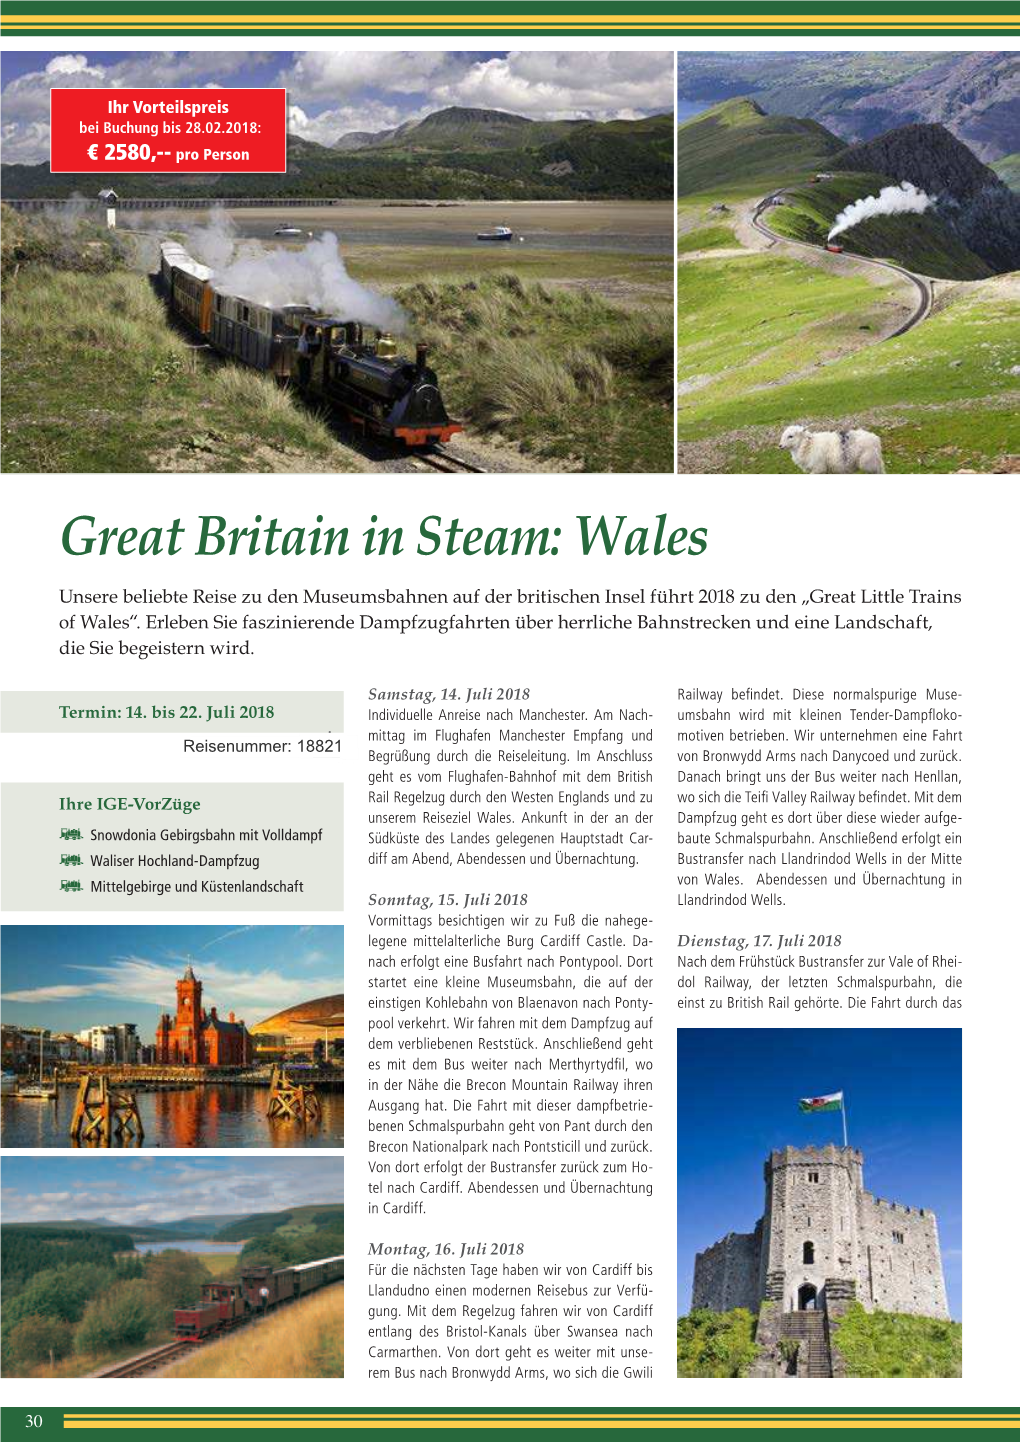 Great Britain in Steam: Wales